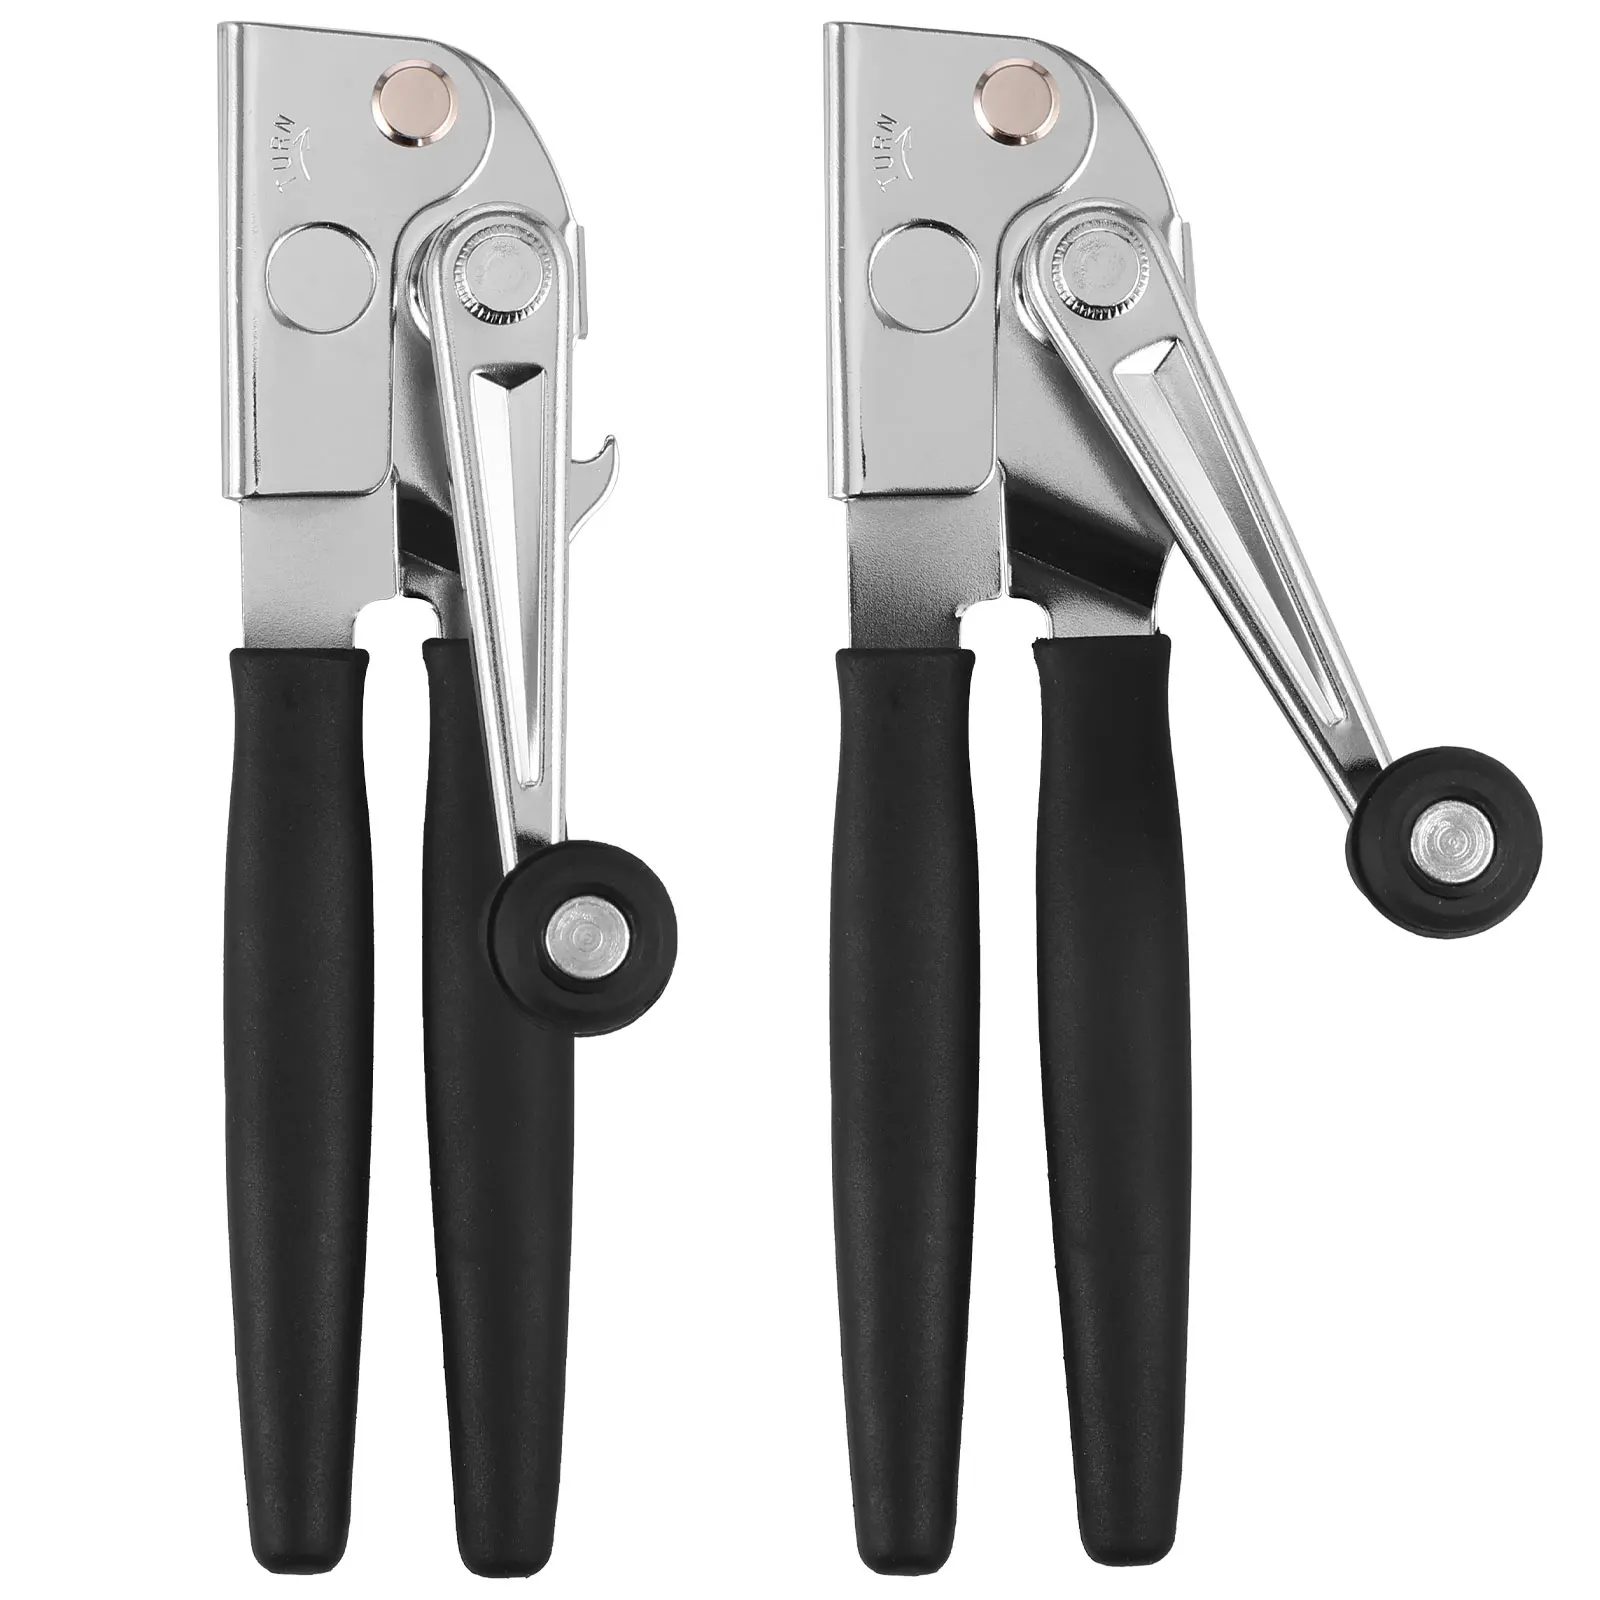 

2Pcs Hand Crank Can Opener with Ergonomic Handle Stainless Steel Manual Bottle Opener Smooth Edge with Sharp Blades Labor Saving